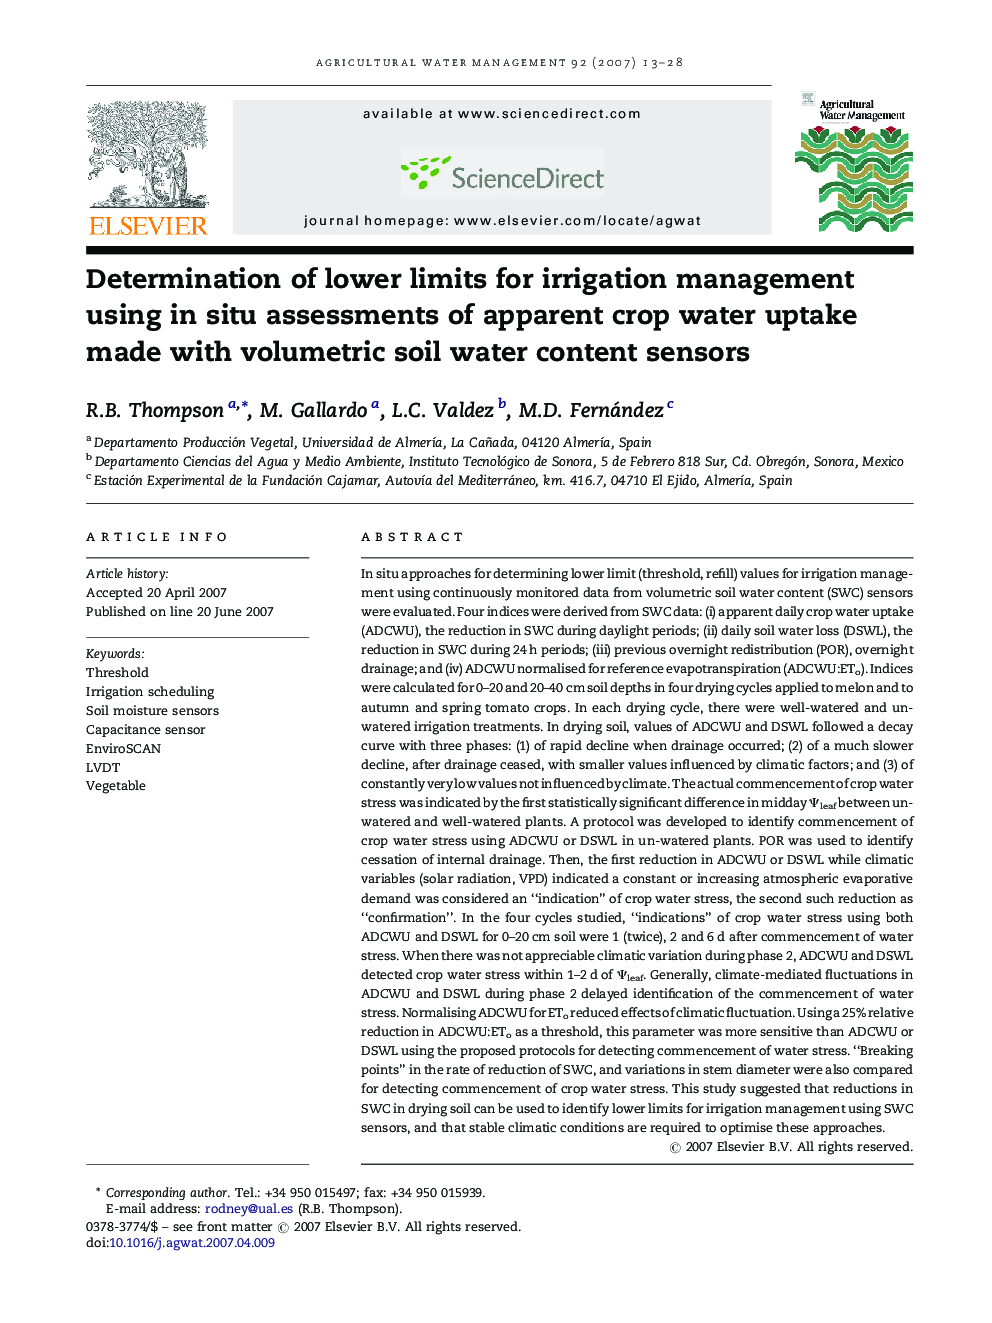 Determination of lower limits for irrigation management using in situ assessments of apparent crop water uptake made with volumetric soil water content sensors